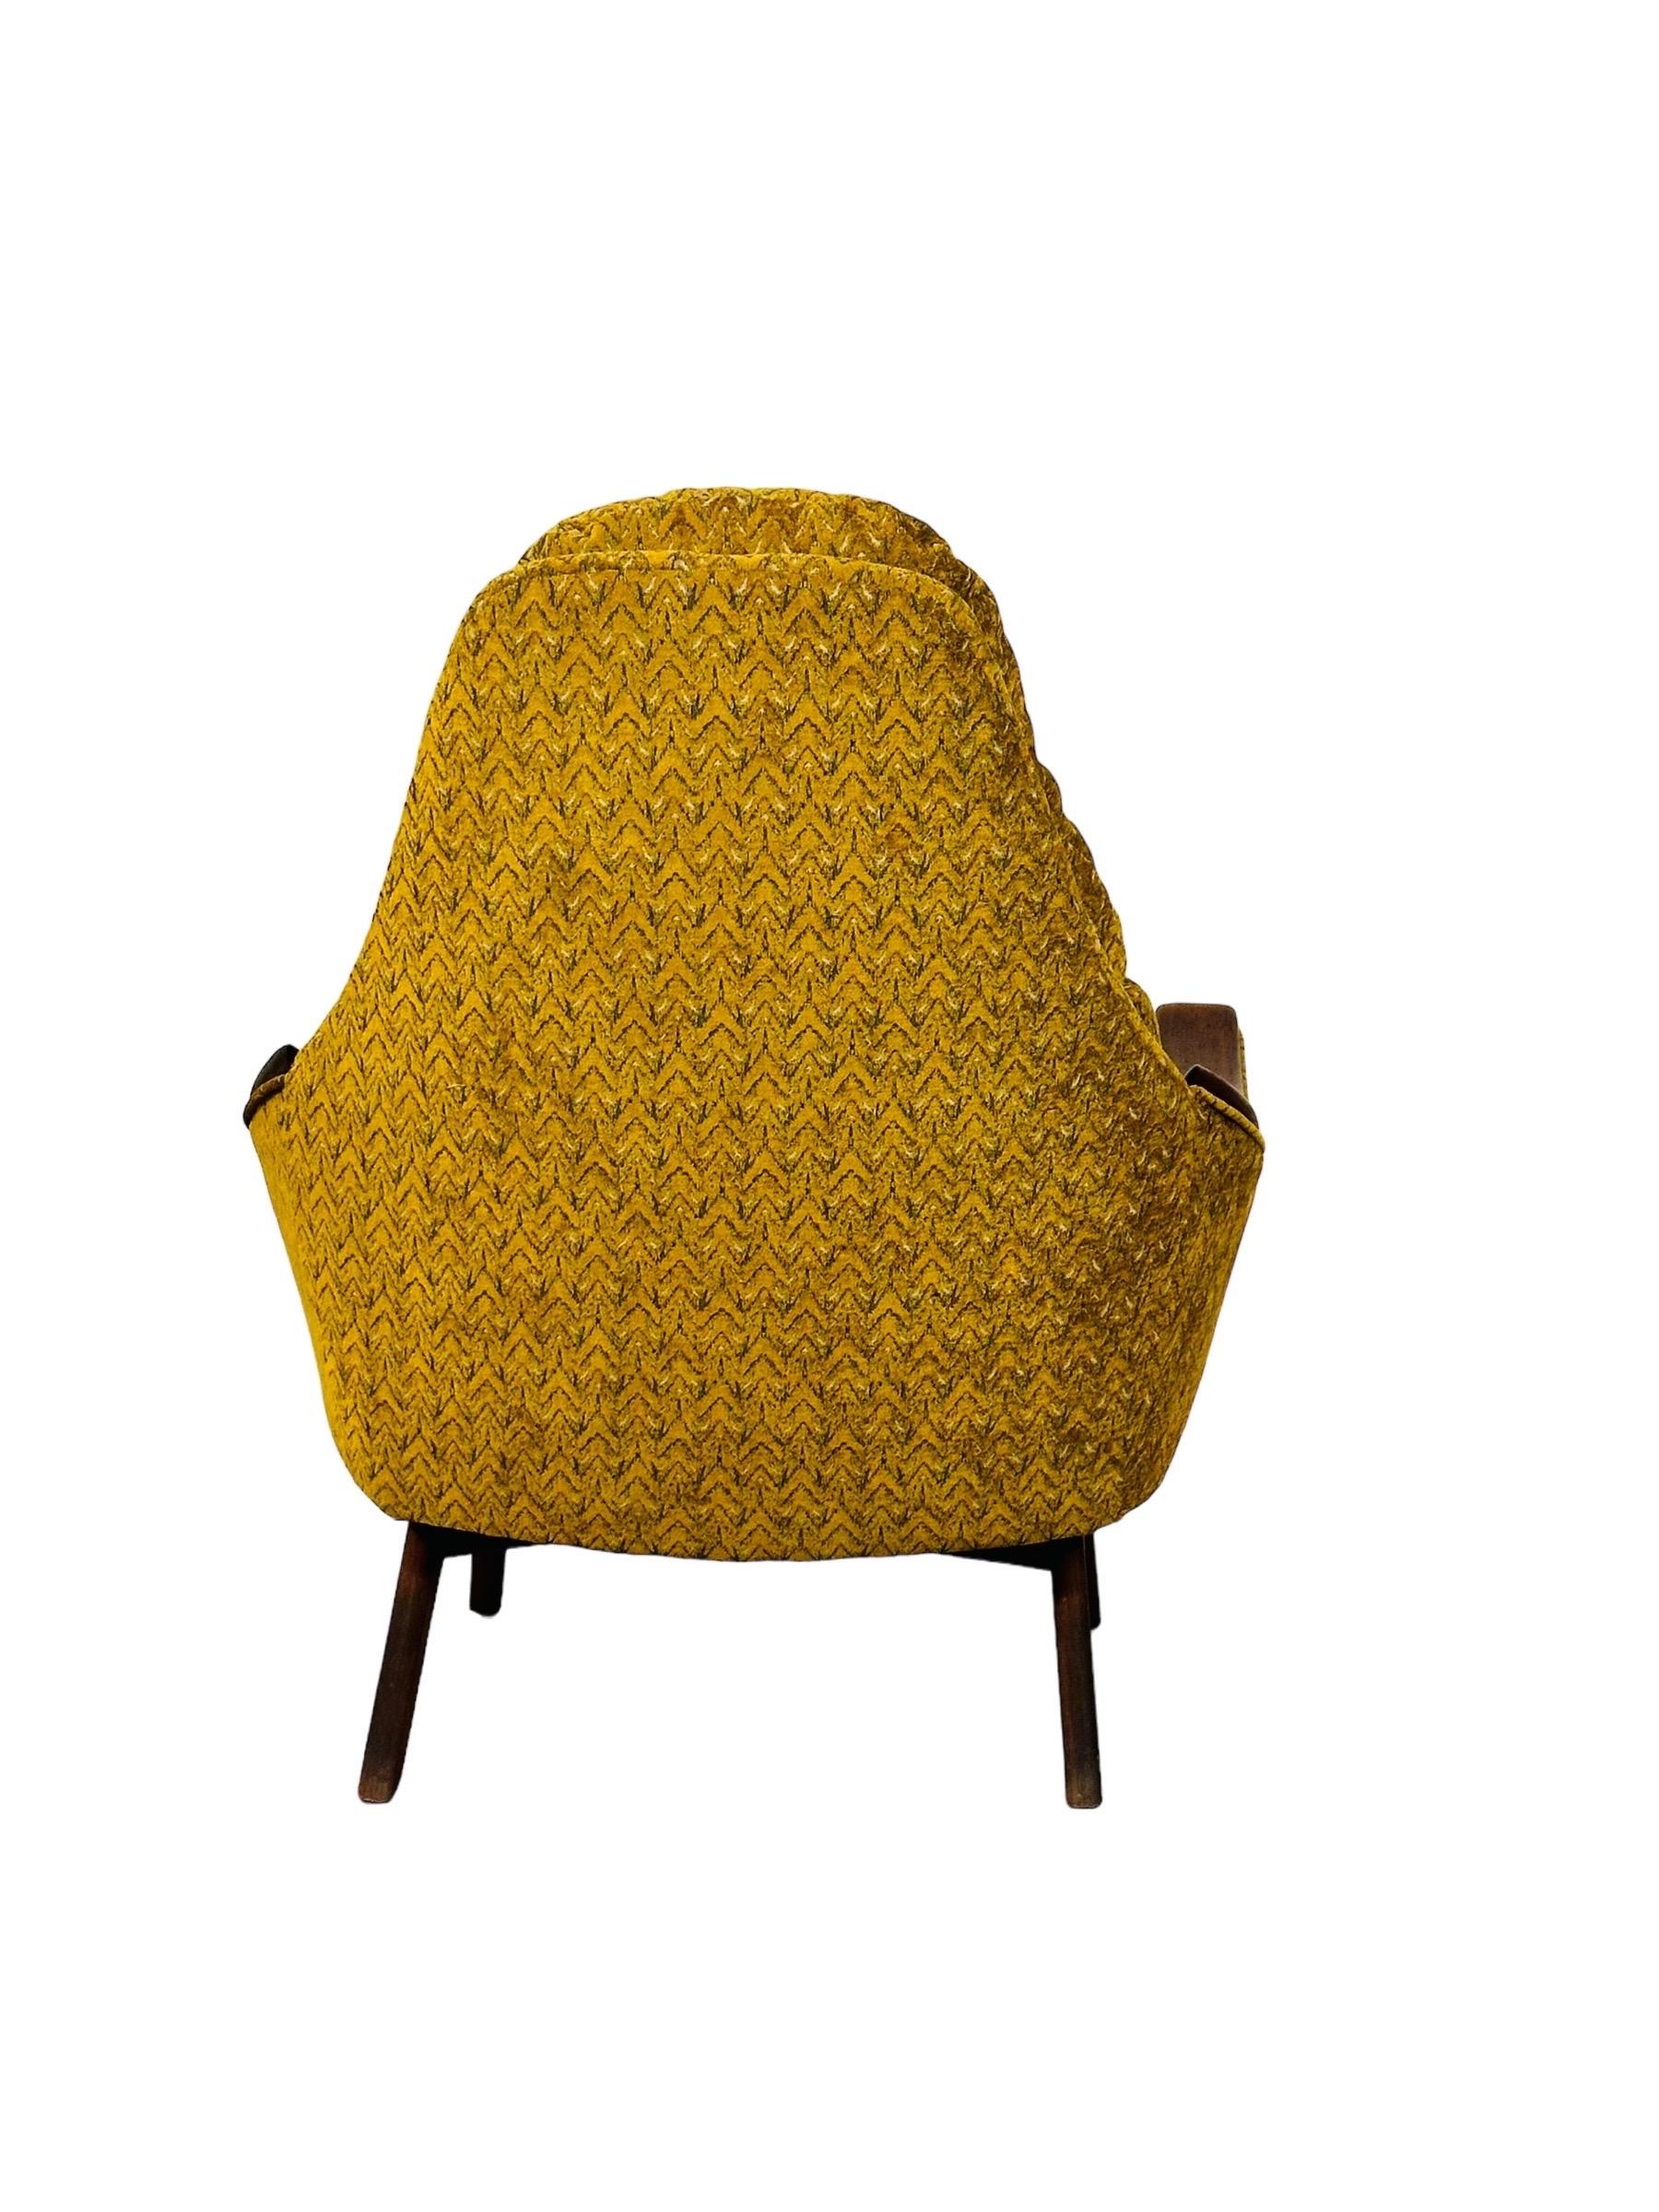 Fabric Adrian Pearsall Lounge Chair For Sale